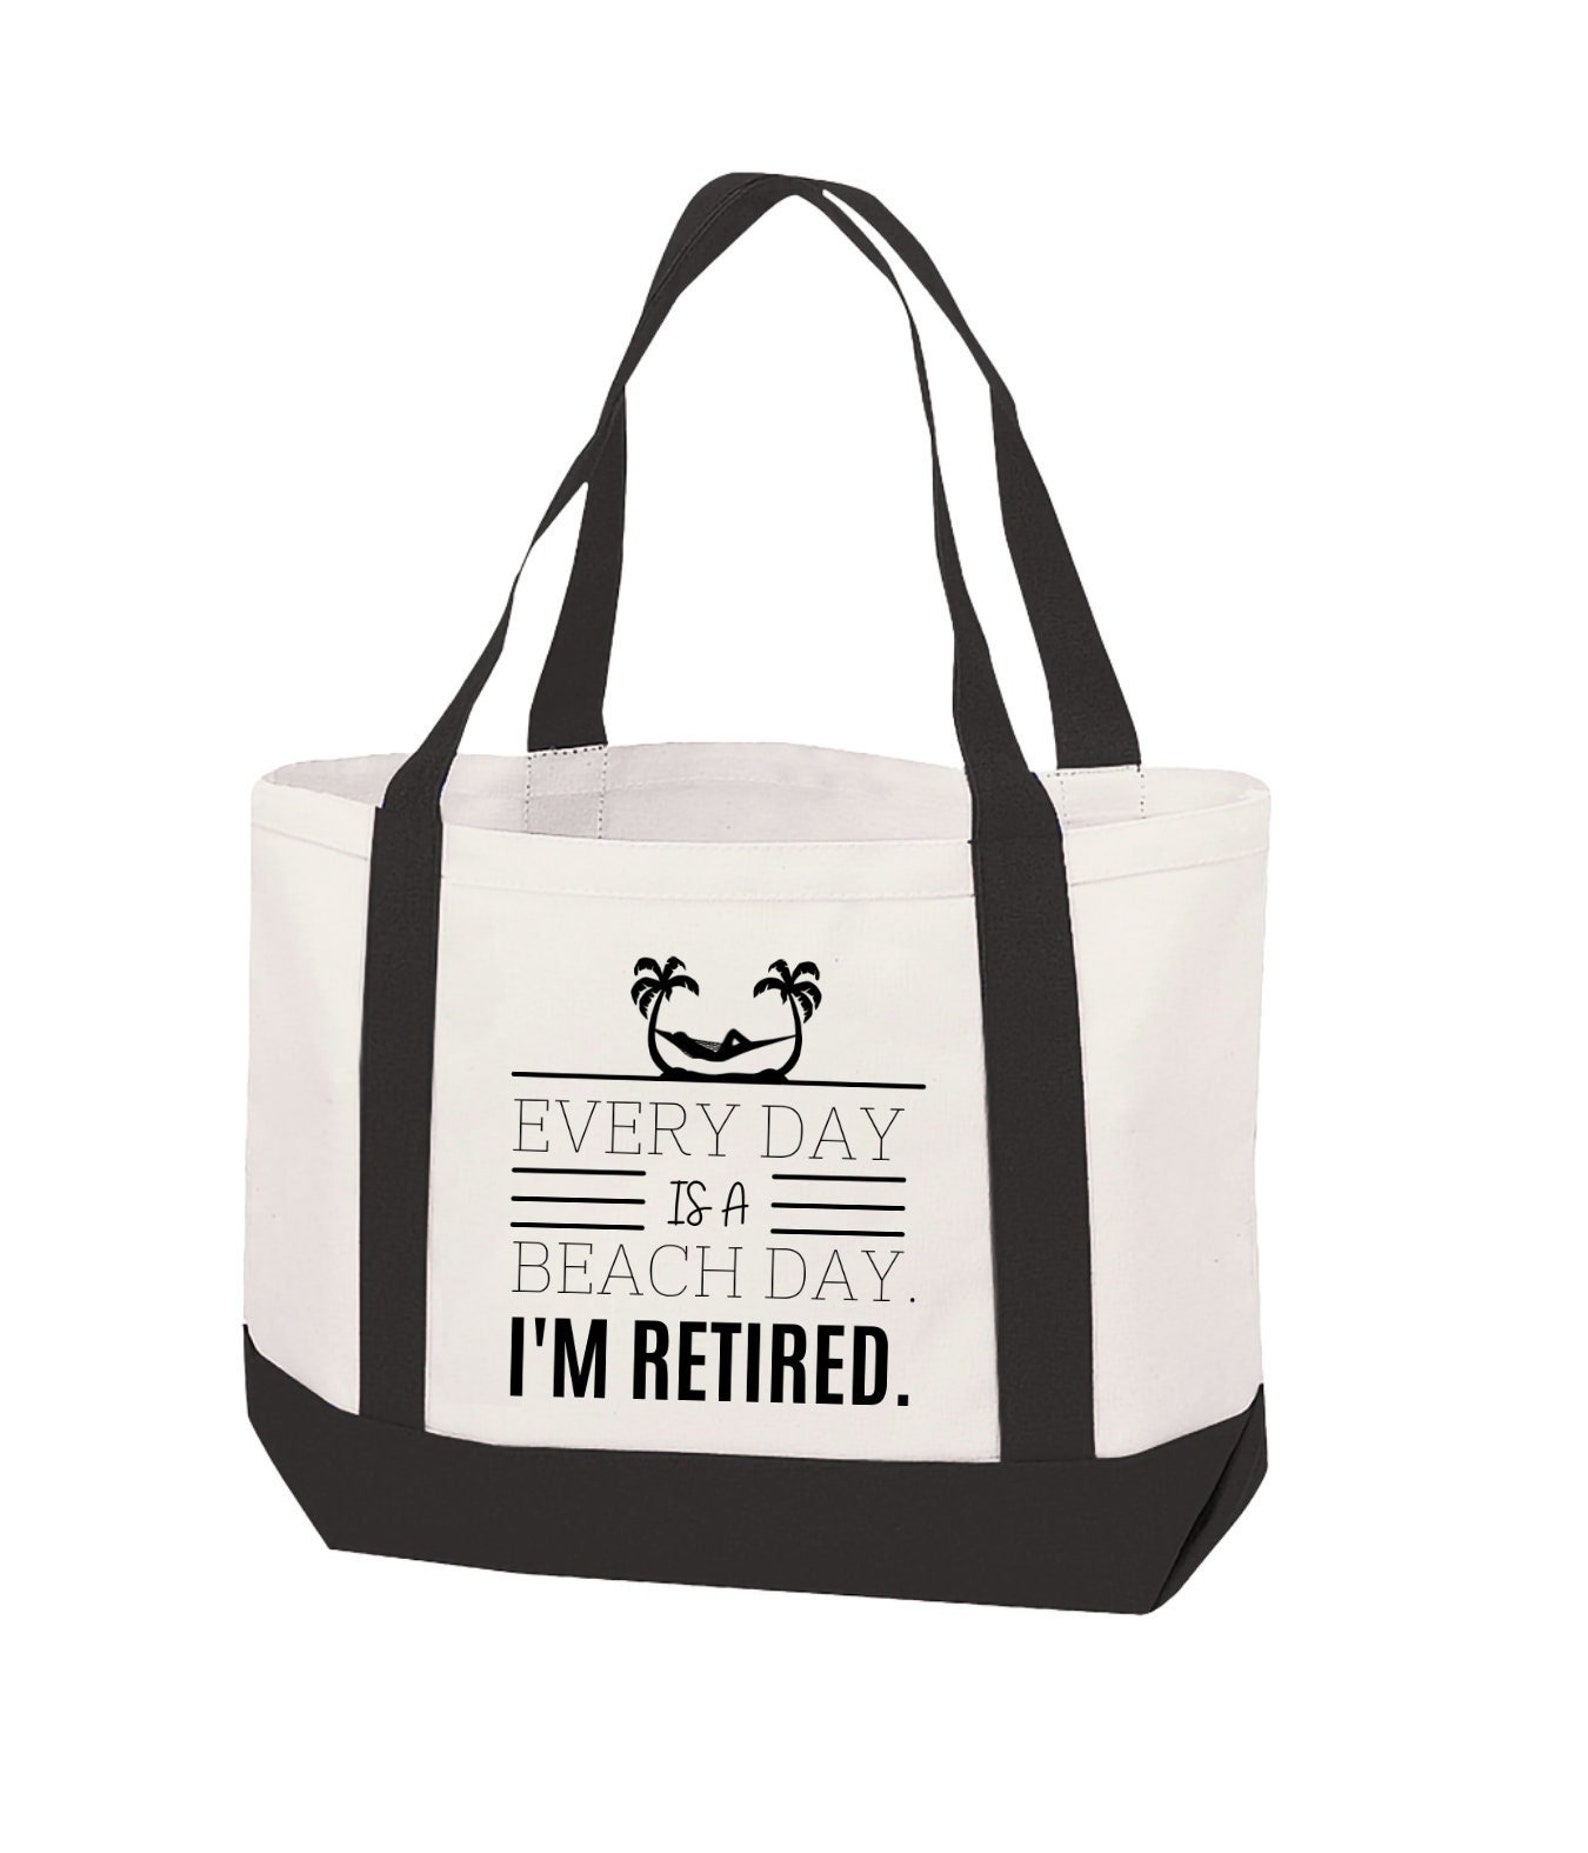 A tote bag with the meaning of congratulating her on her retirement, after a long hard work, it's time for her to relax.